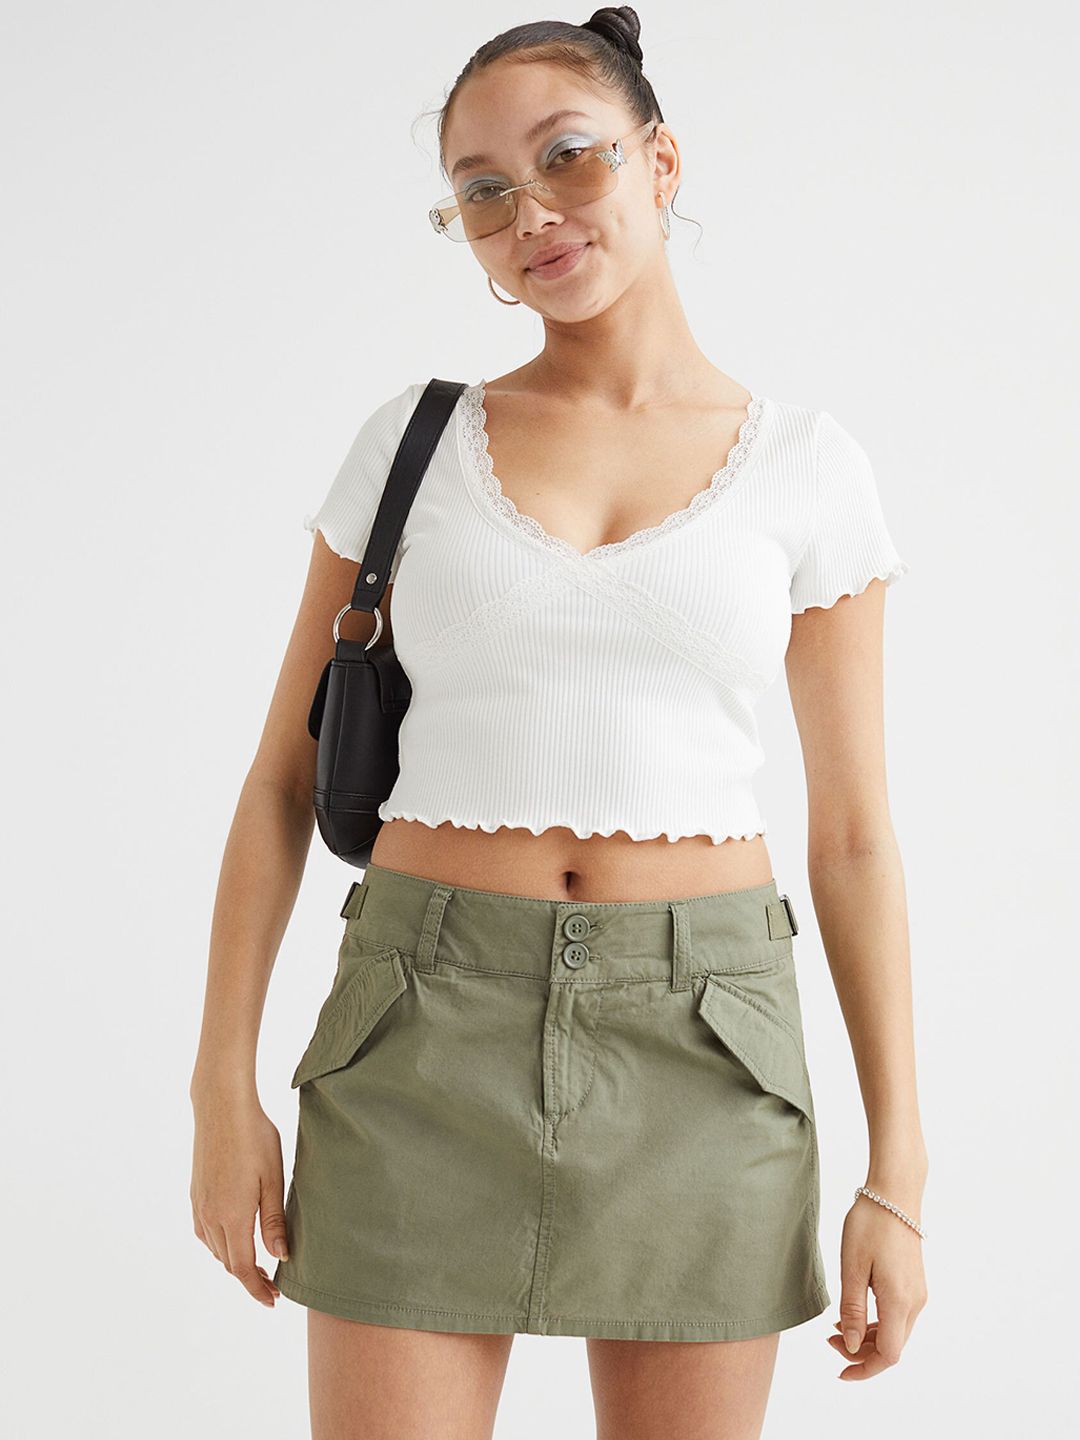 H&M Women Olive Green Cotton Utility Skirt Price in India